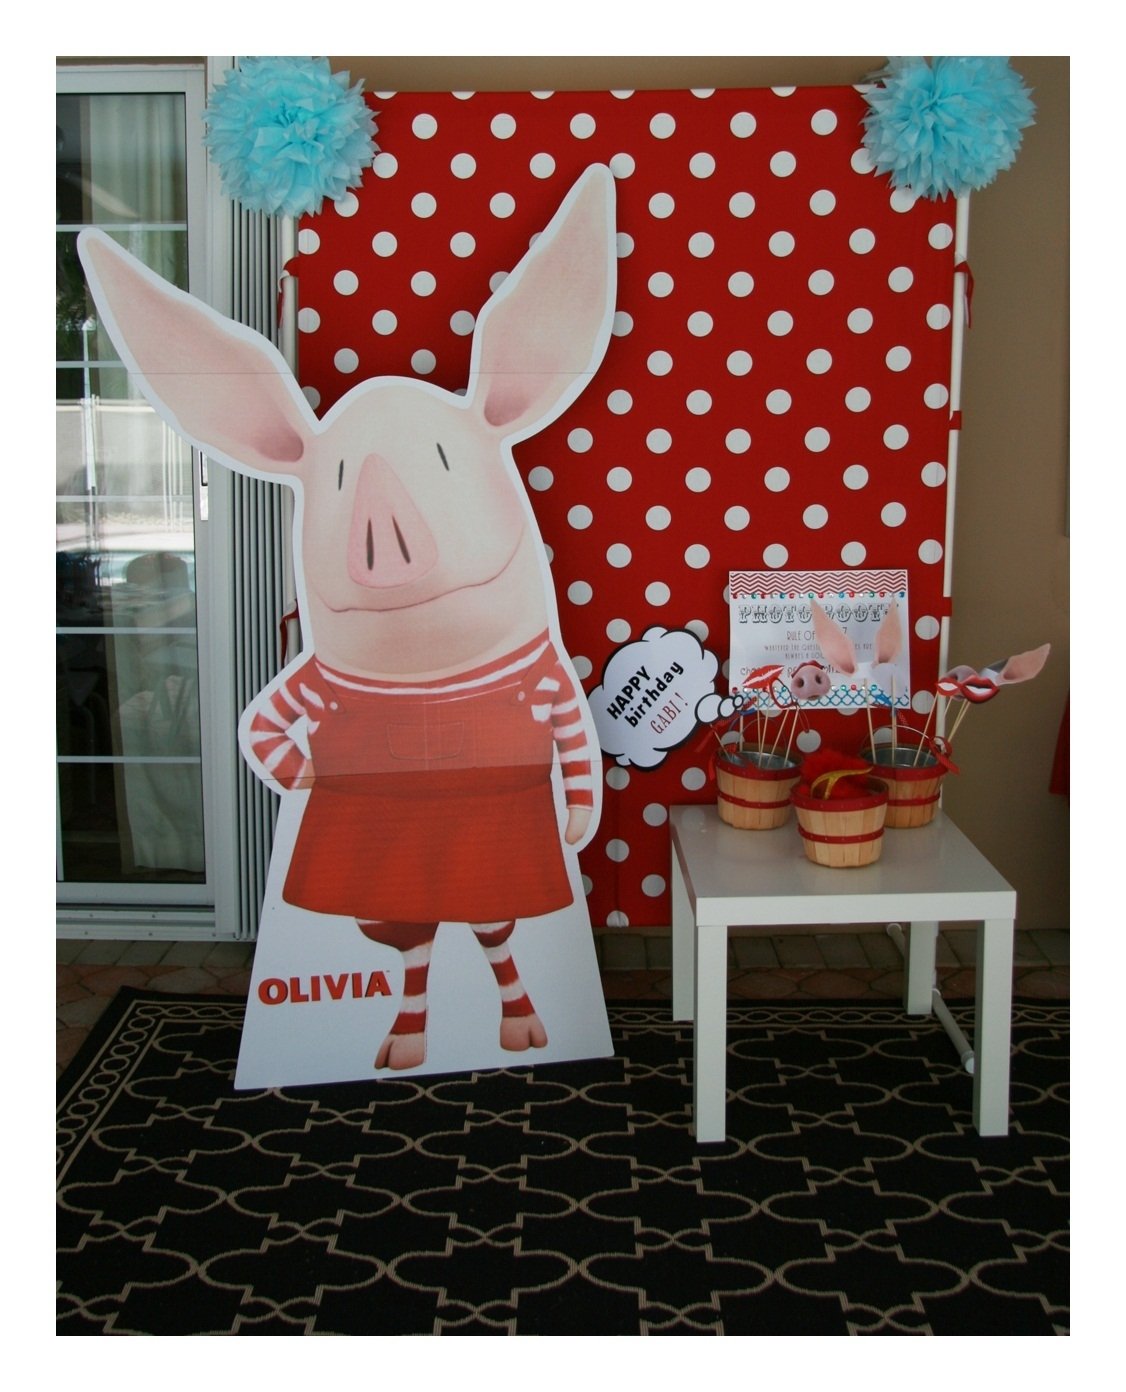 10 Beautiful Olivia The Pig Party Ideas sweet bambinos real party olivia the pig birthday party photo 2022